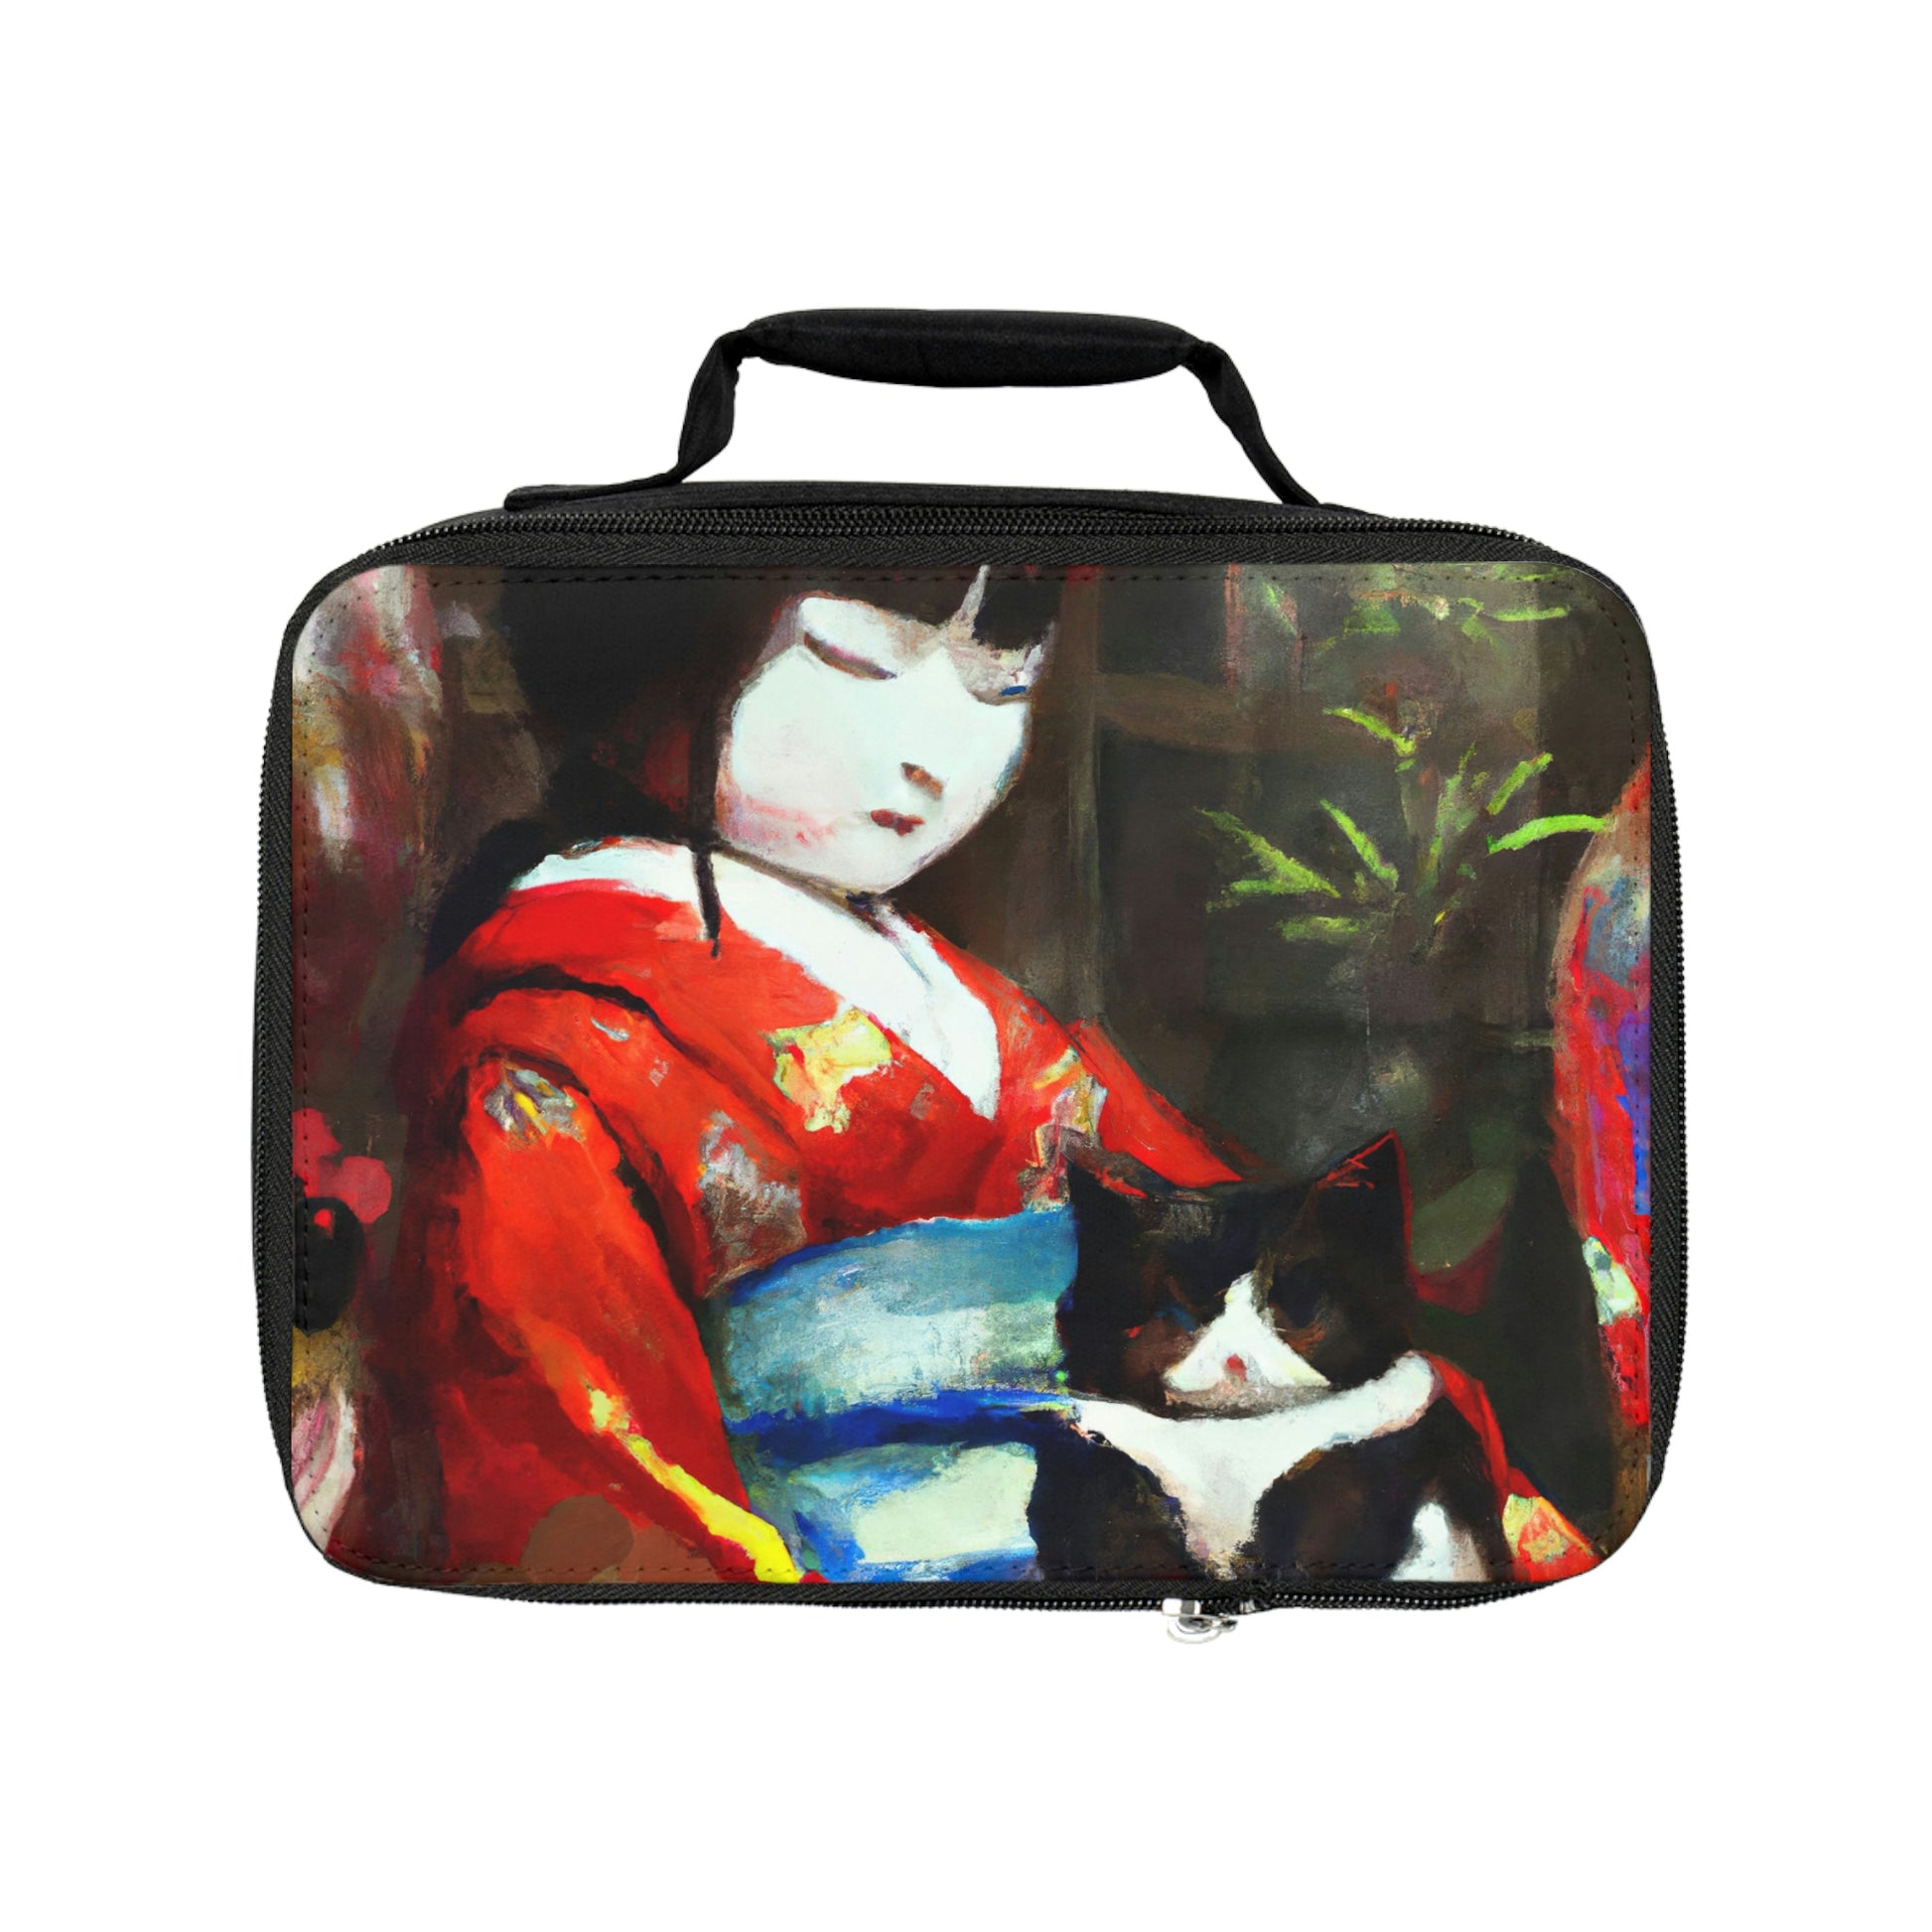 Geisha and cat Lunch Bag, maiko and cat lunch bag, Japanese feudal art lunch bag, back to school gift, Asian-inspired art lunch bag